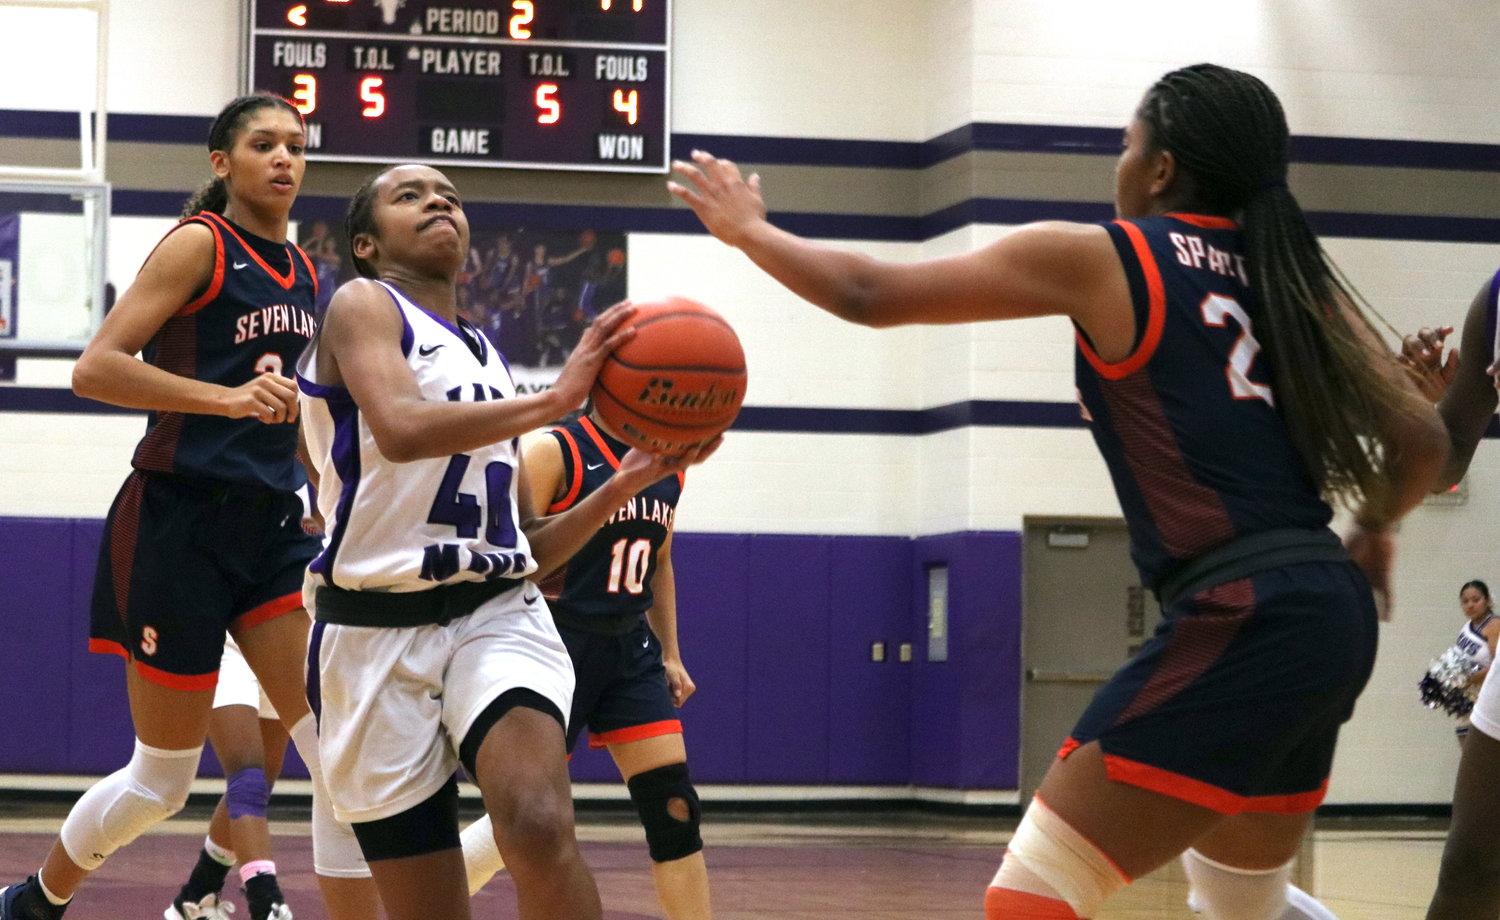 Trinitee McFarland drives to the basket during Friday's game between Seven Lakes and Morton Ranch at the Morton Ranch gym.